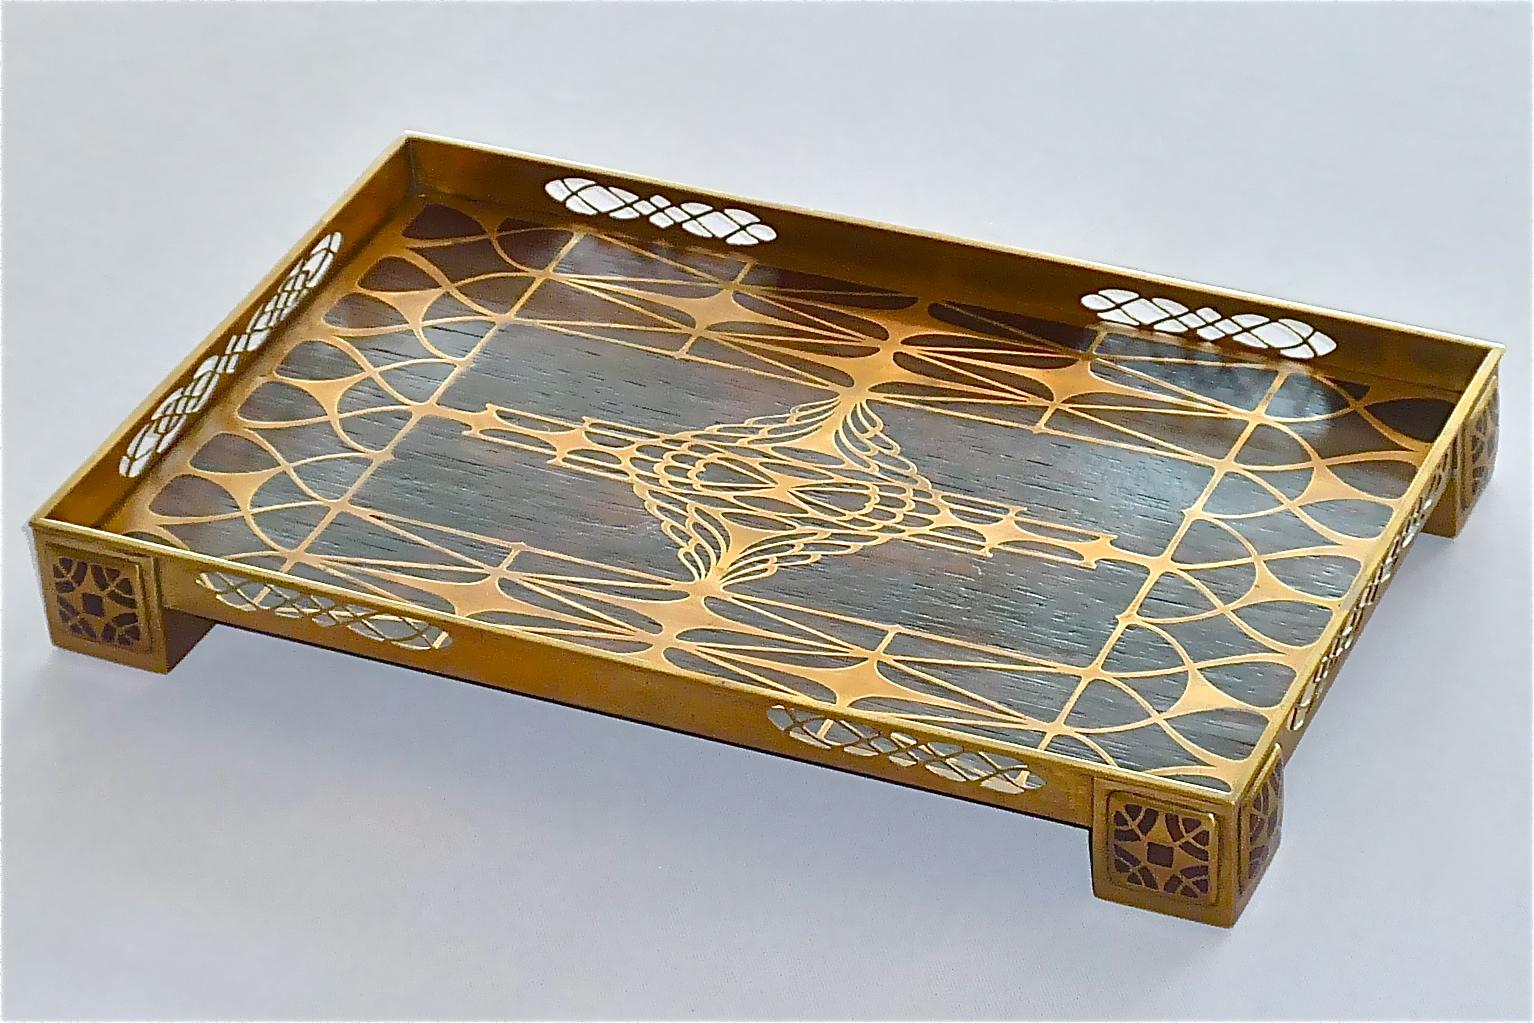 Fine and rare Jugendstil / Art Nouveau / Secession / Arts & Crafts Erhard & Sohne large tray on square column feet and pen holder pot on three ball feet with amazing inlaid wood veneer and patinated brass showing floral leafy branch decoration,